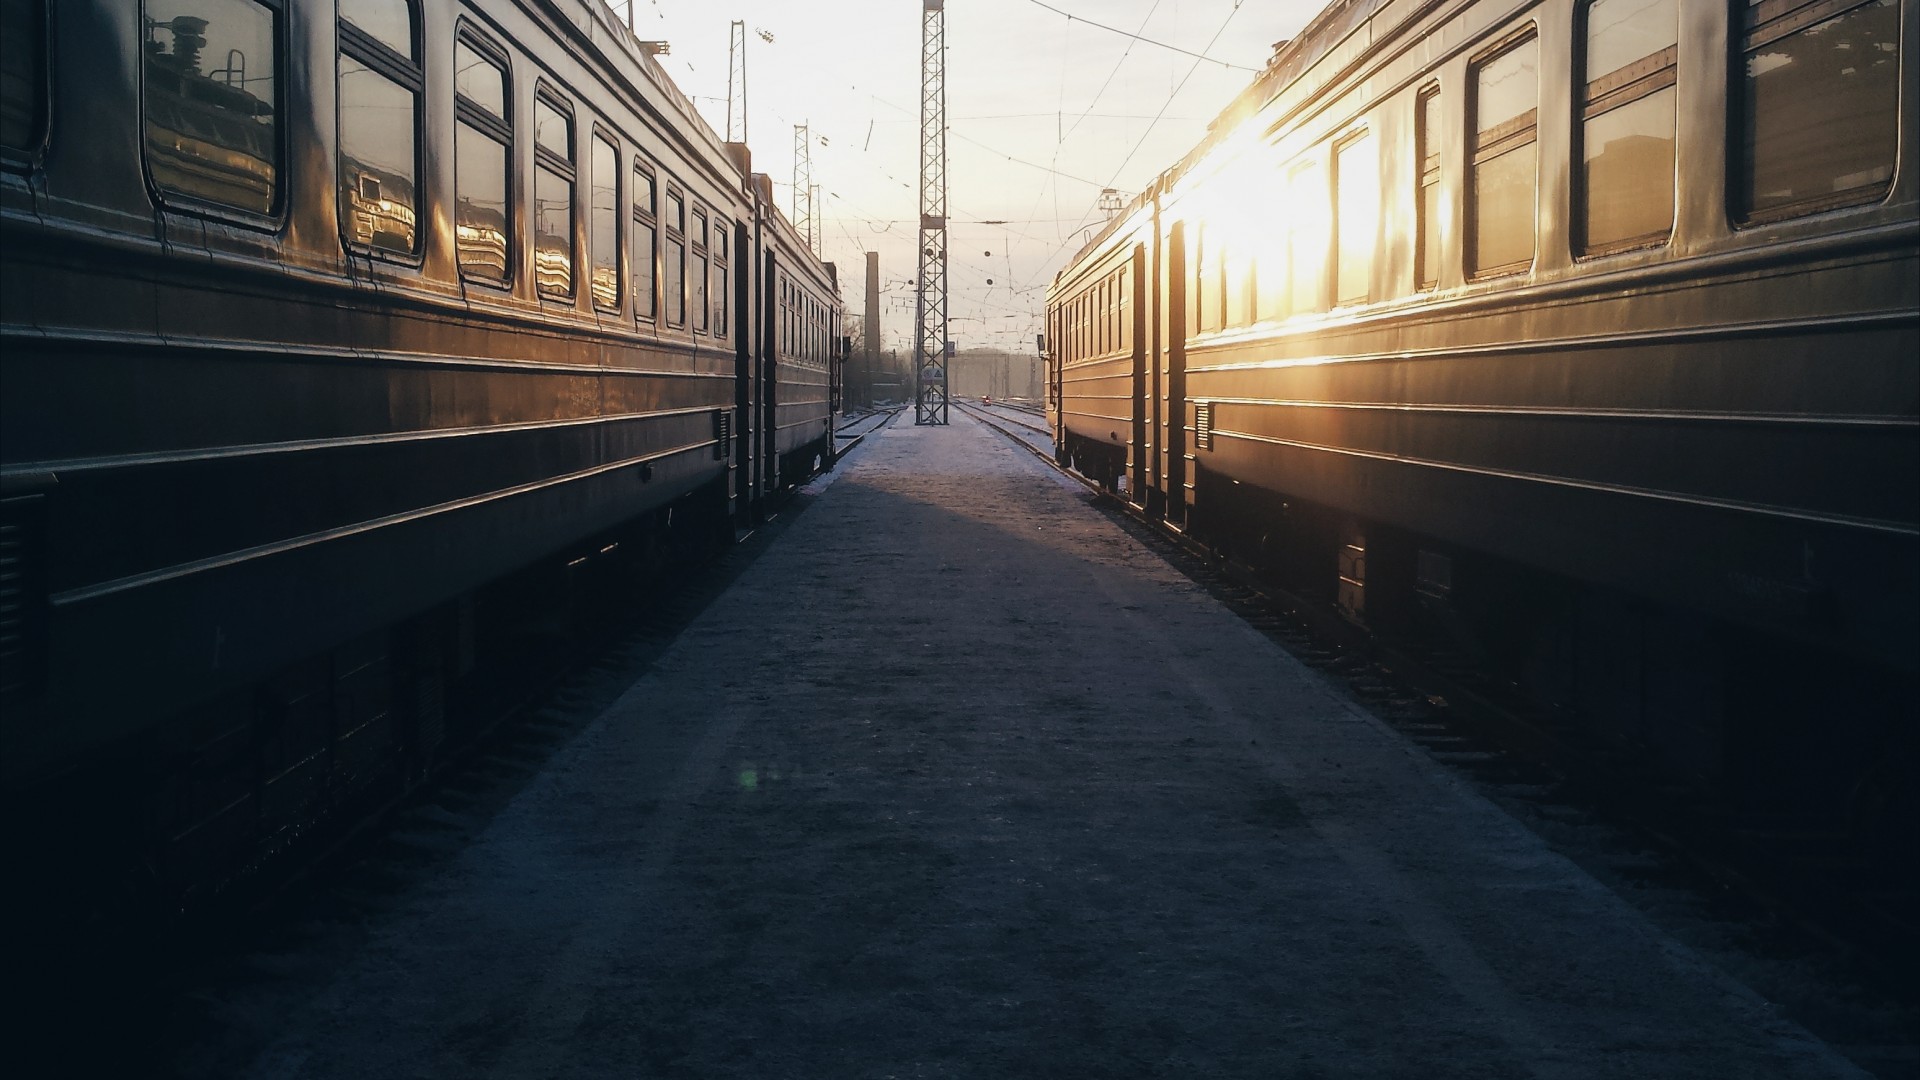 General 1920x1080 train train station photography vehicle sunlight urban outdoors Russia